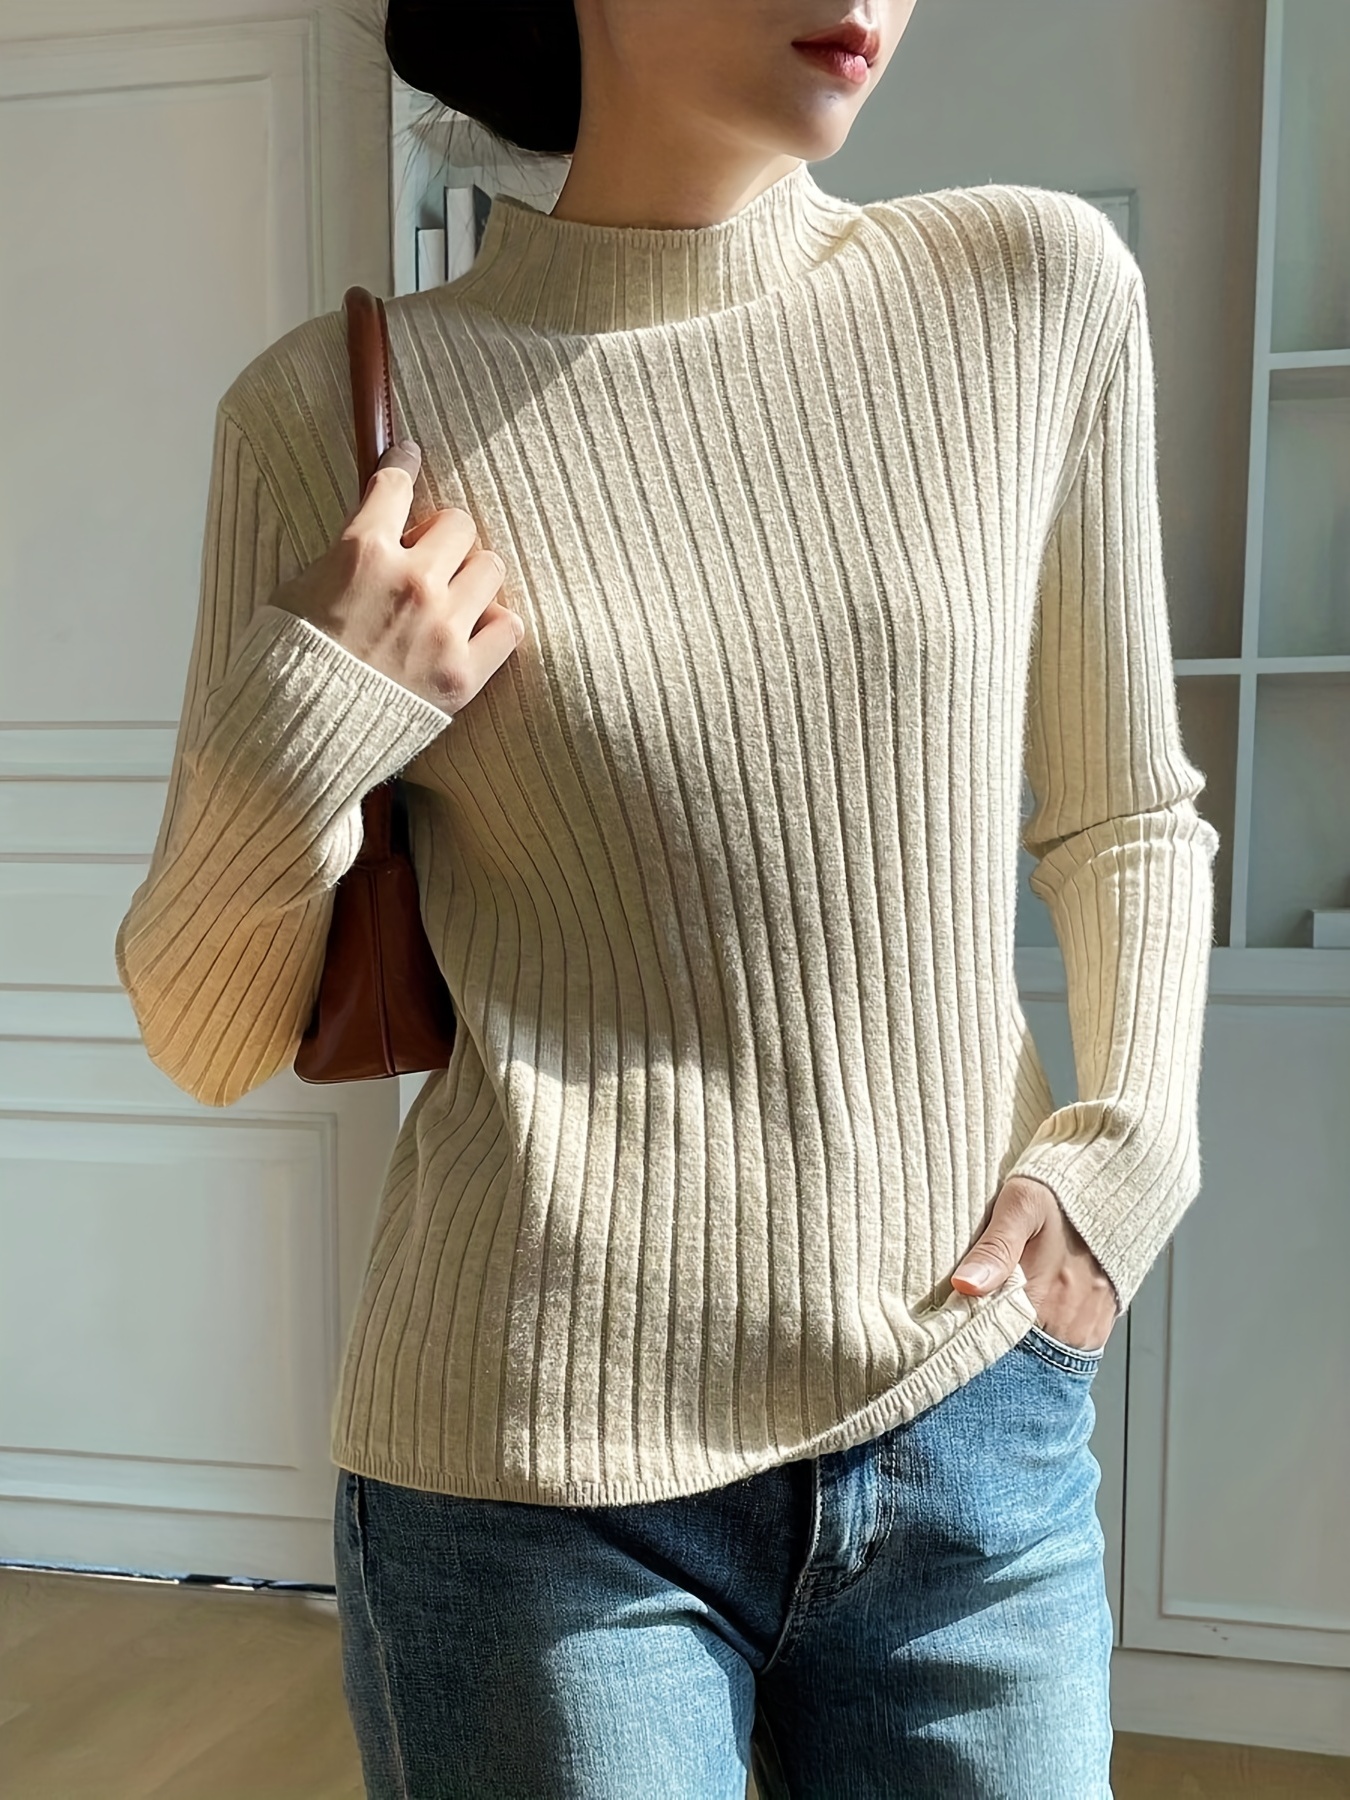 2Xtremz Textured High Neck Tricot Sweater with Long Sleeves